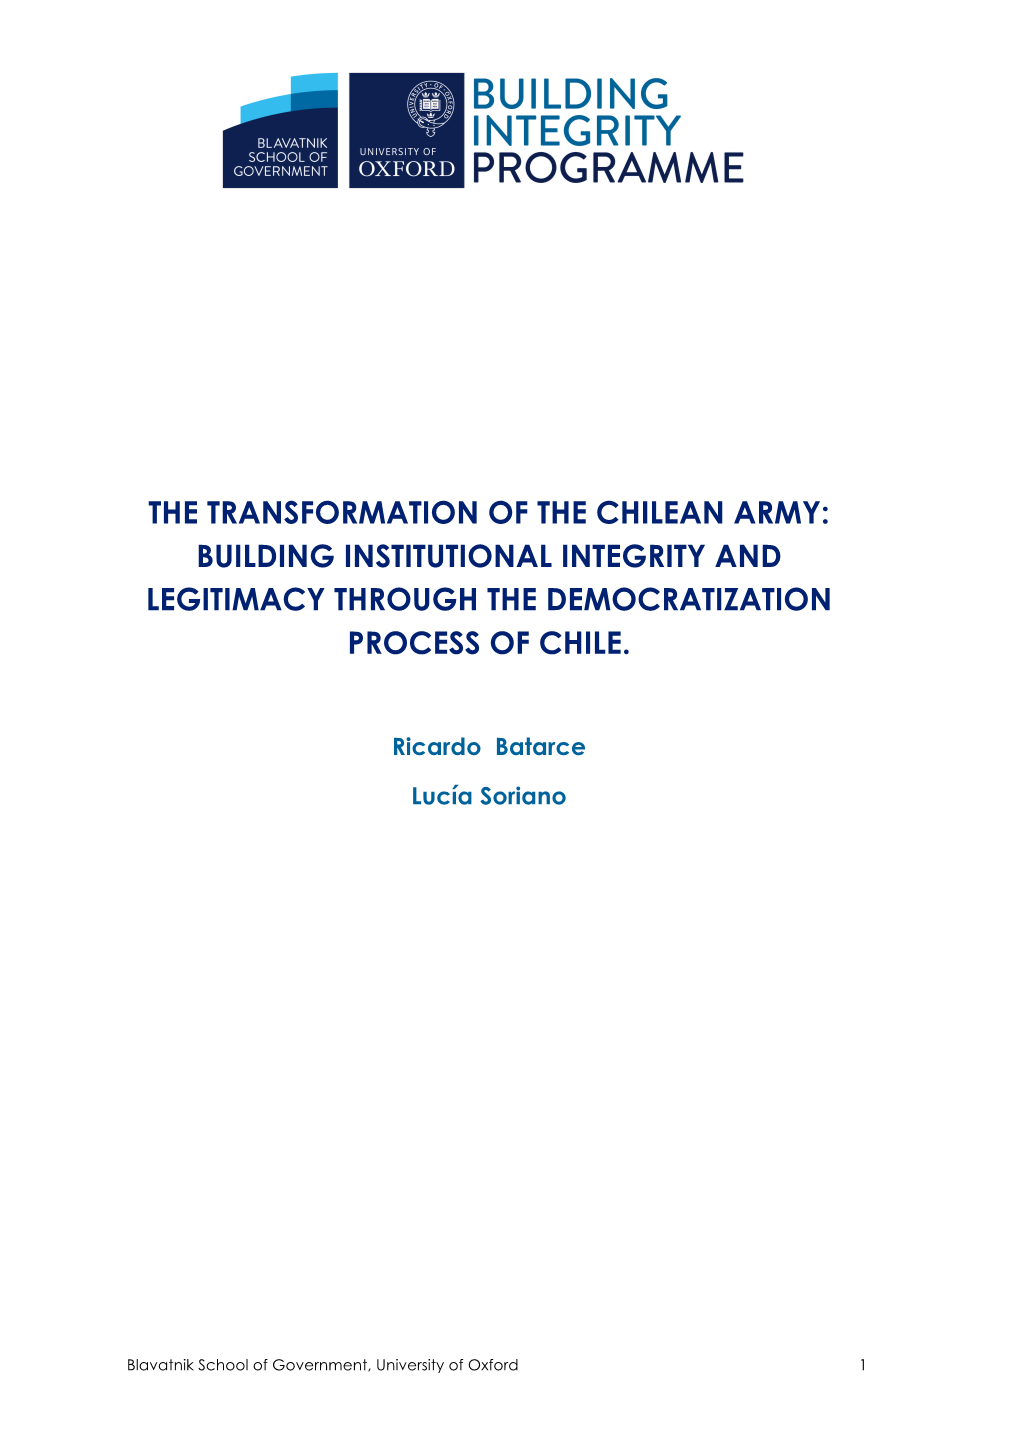 The Transformation of the Chilean Army: Building Institutional Integrity and Legitimacy Through the Democratization Process of Chile